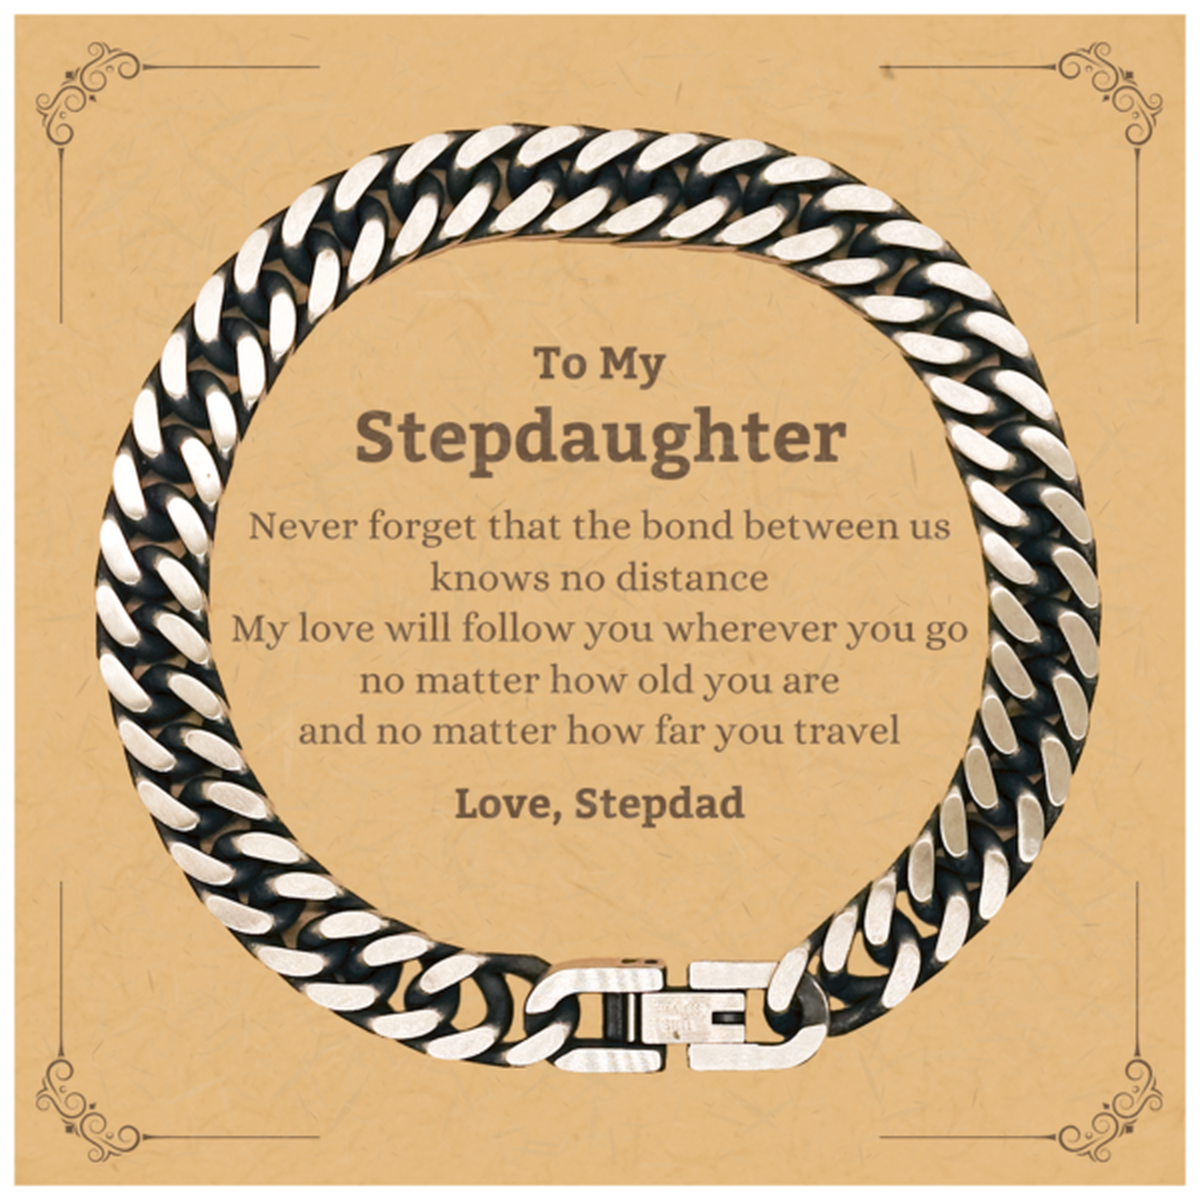 Stepdaughter Birthday Gifts from Stepdad, Adjustable Cuban Link Chain Bracelet for Stepdaughter Christmas Graduation Unique Gifts Stepdaughter Never forget that the bond between us knows no distance. Love, Stepdad